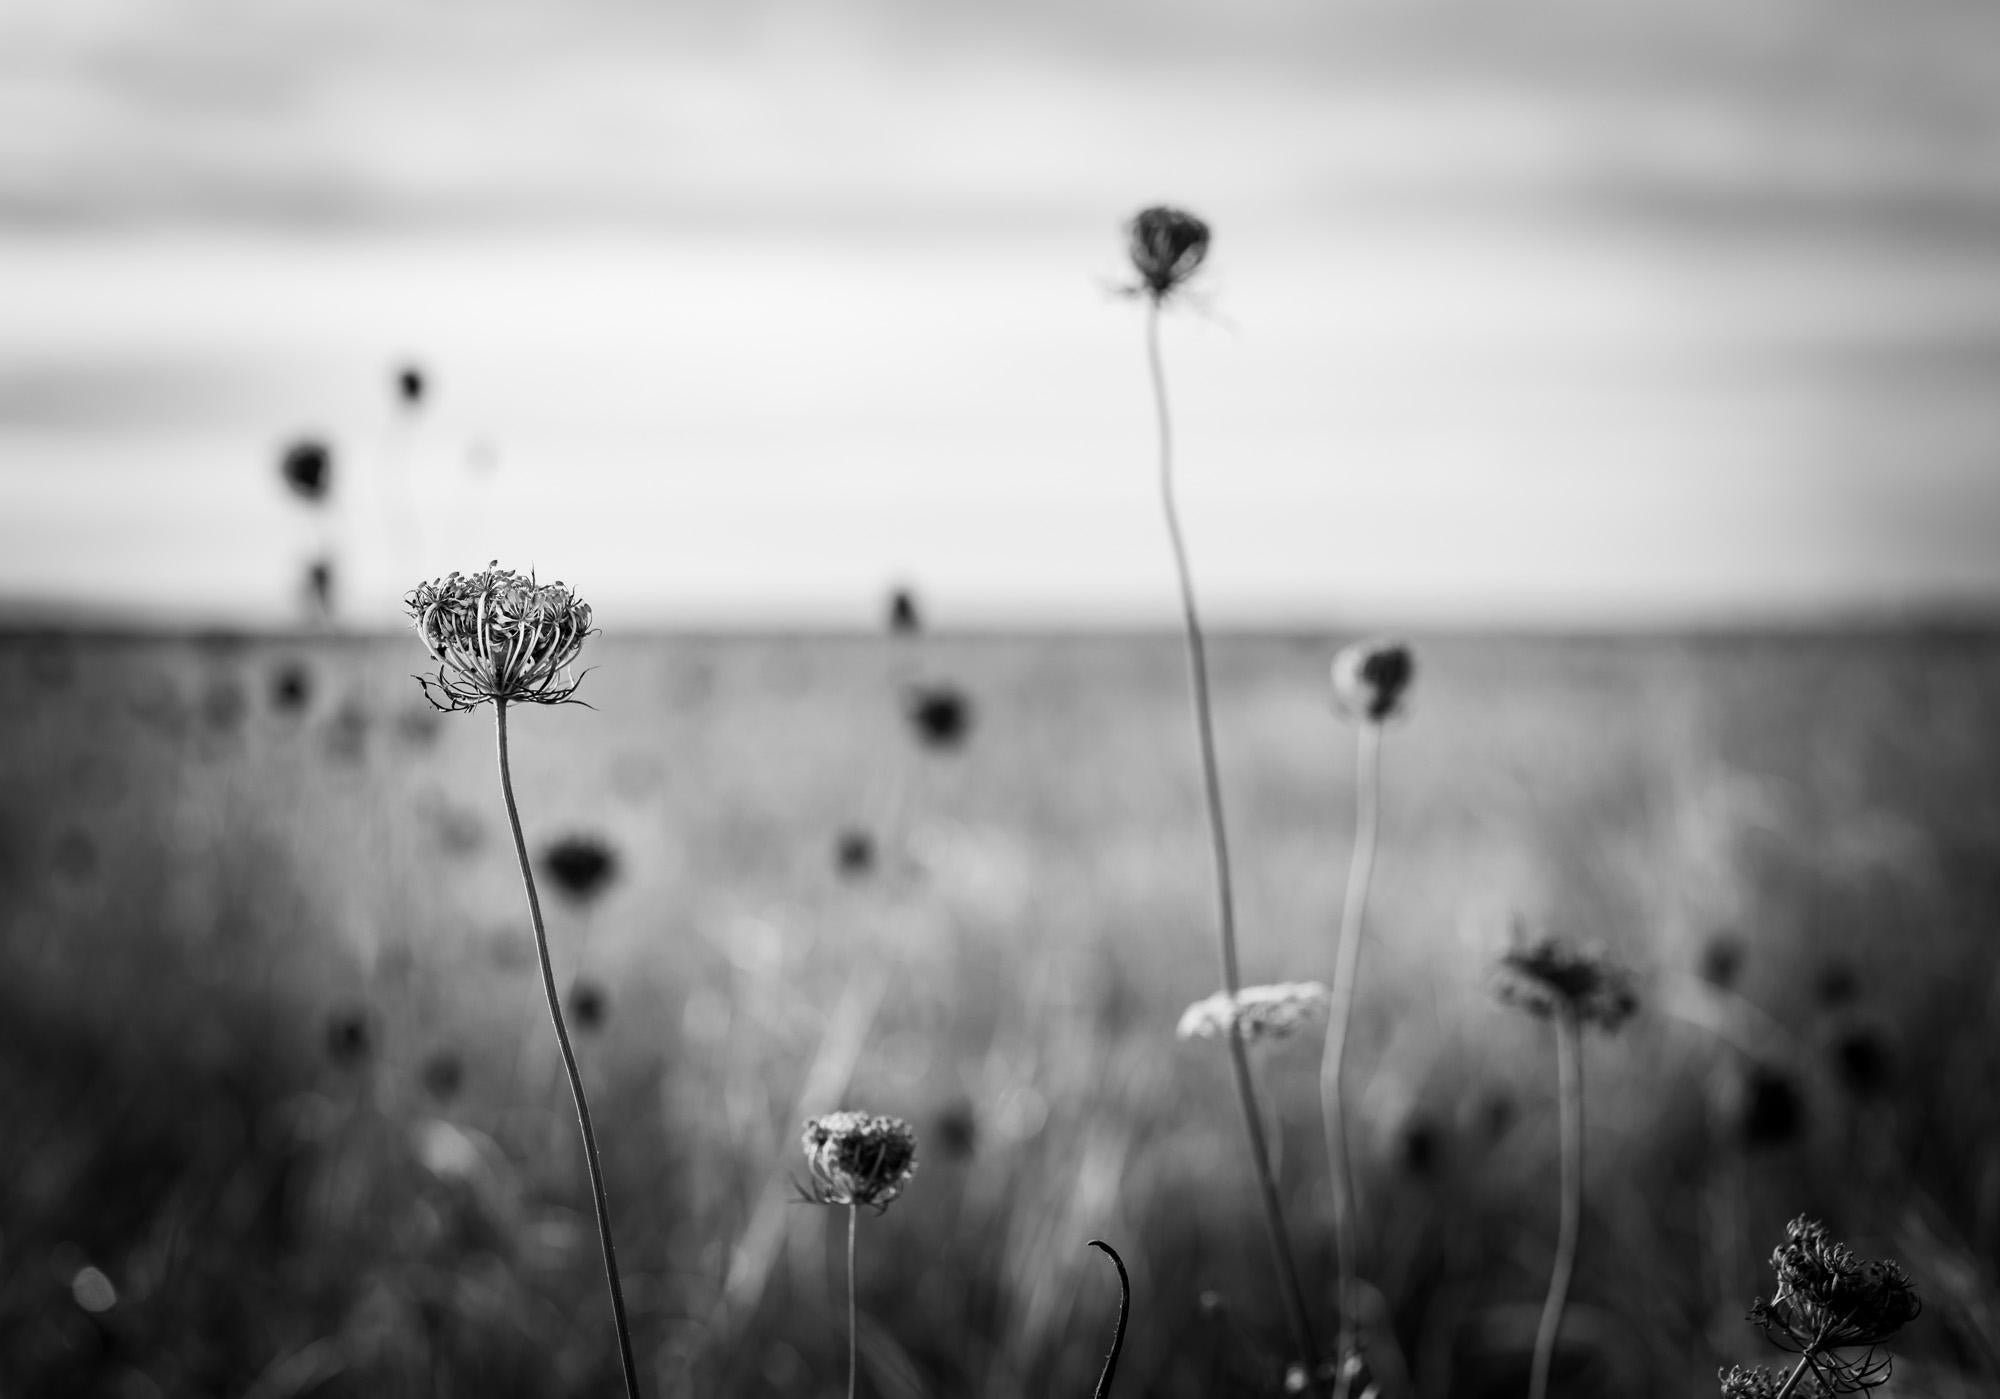 Limited edition black and white photograph on archival pigment print. Created in a large field in Maine as I was losing light. These botanicals were everywhere but it was still challenging to get a good composition. 

About:
Lewis’ artistic practice